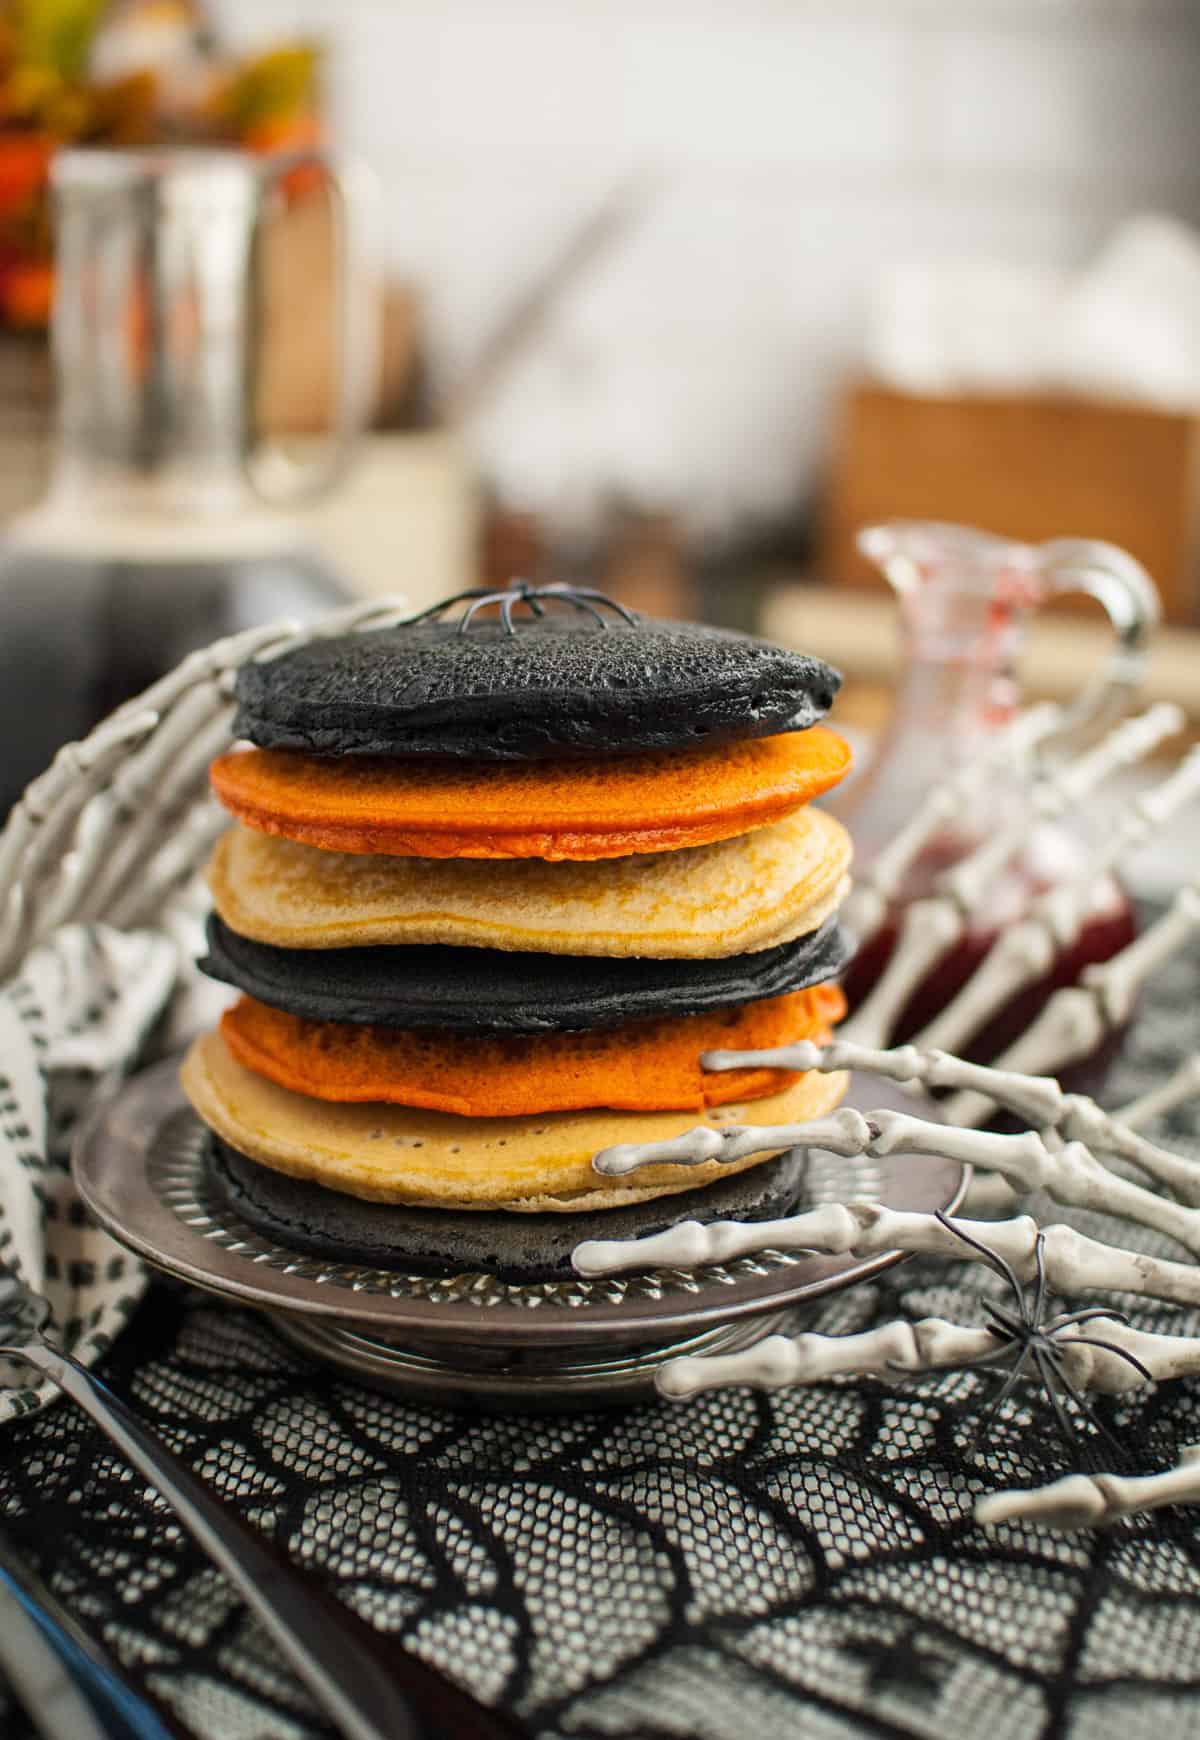 A stack of black, orange, and white pancakes with plastic skeleton hands next to it.